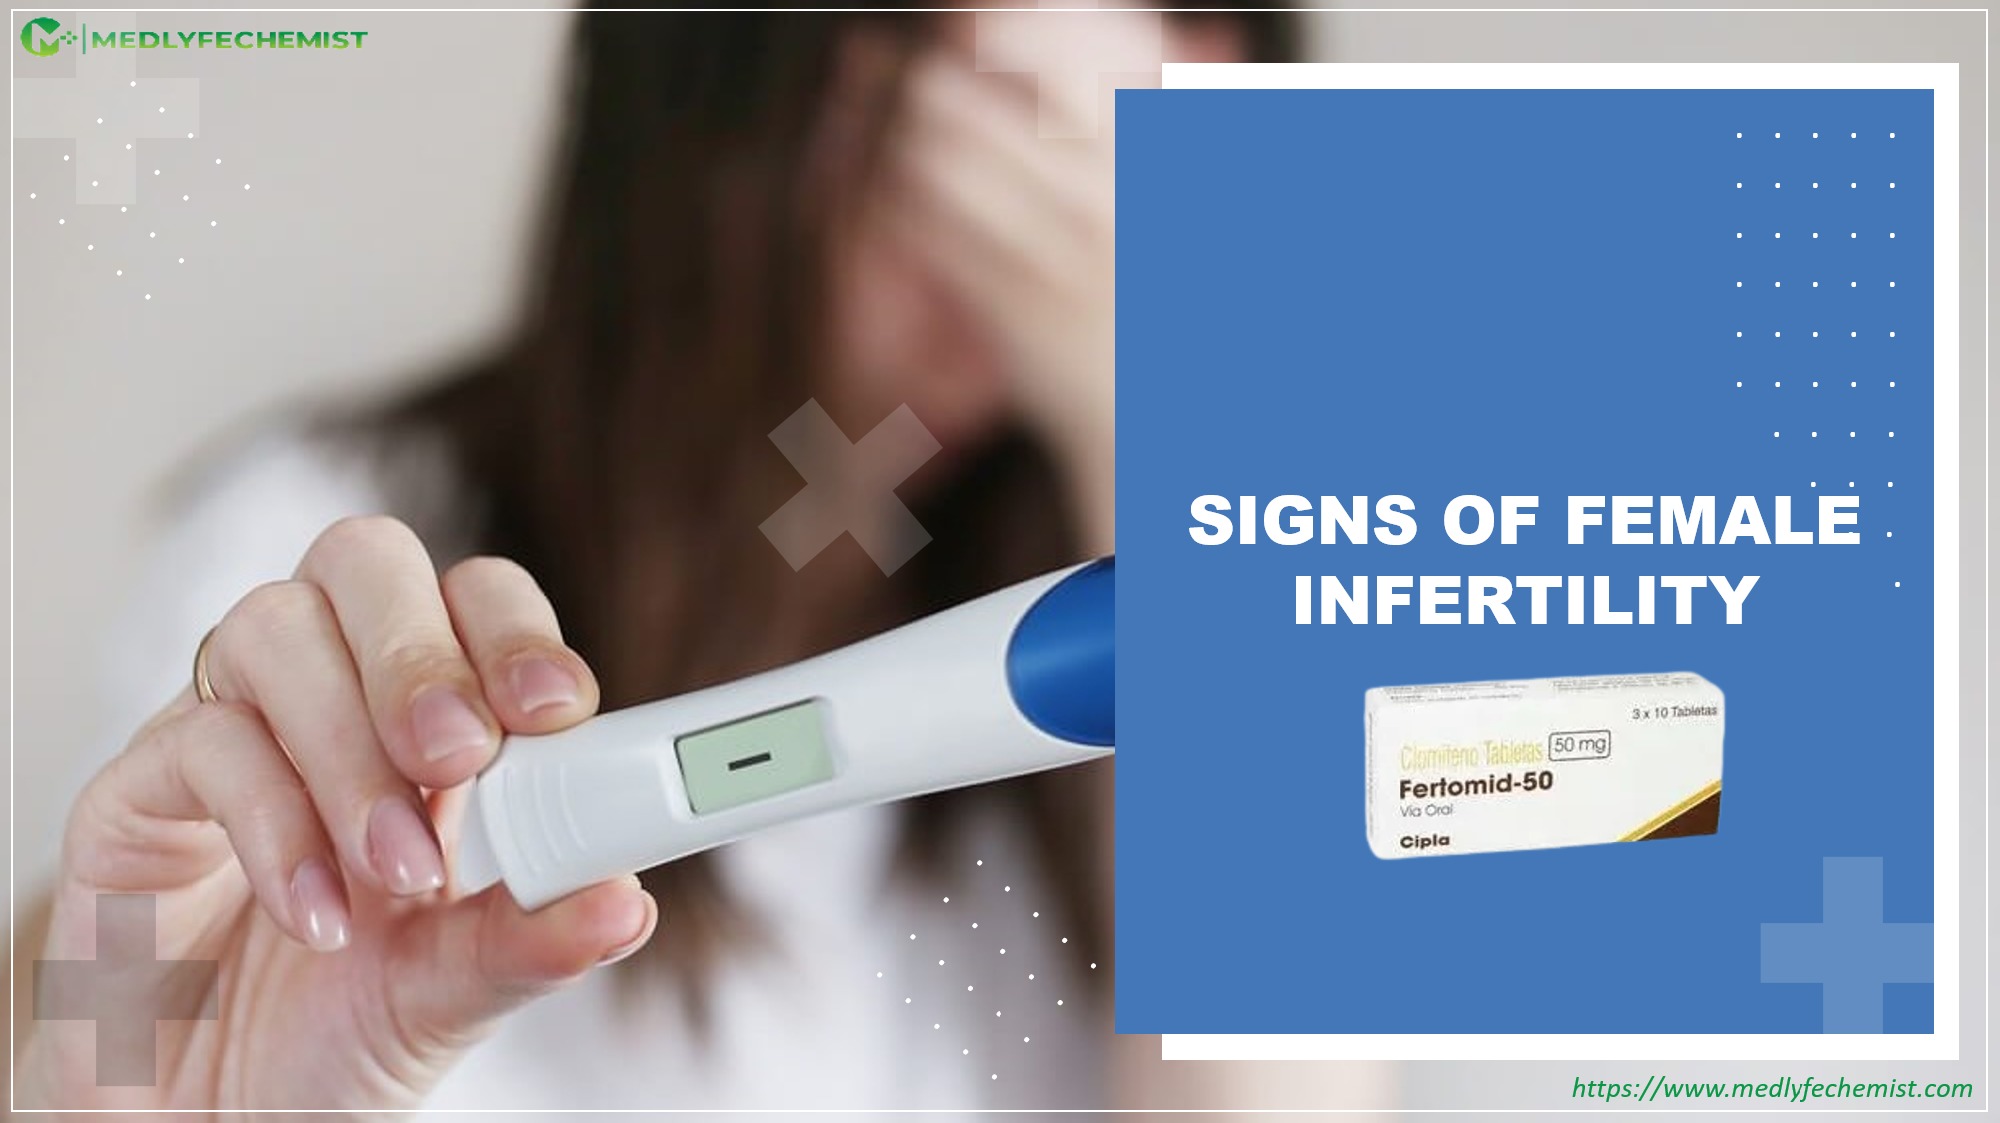 Signs of Female Infertility